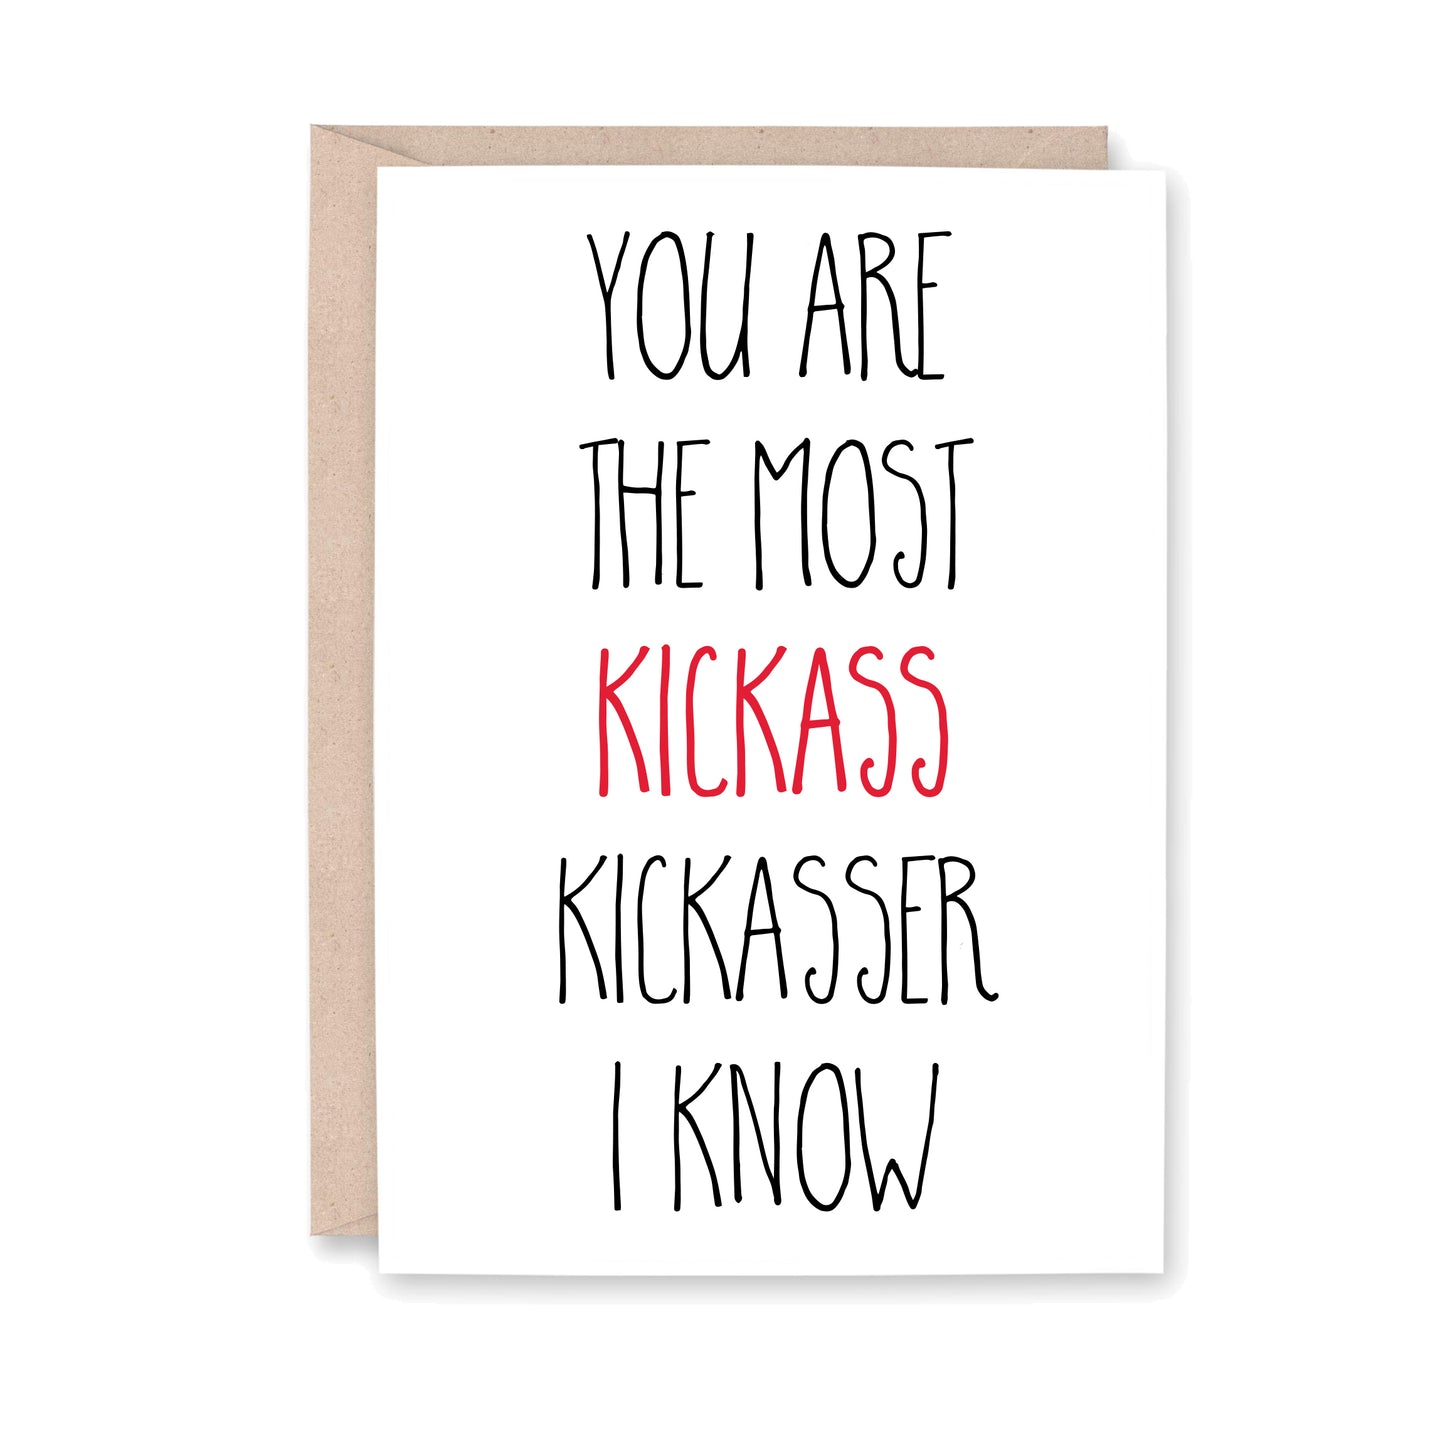 You are the most kickass kickasser I know